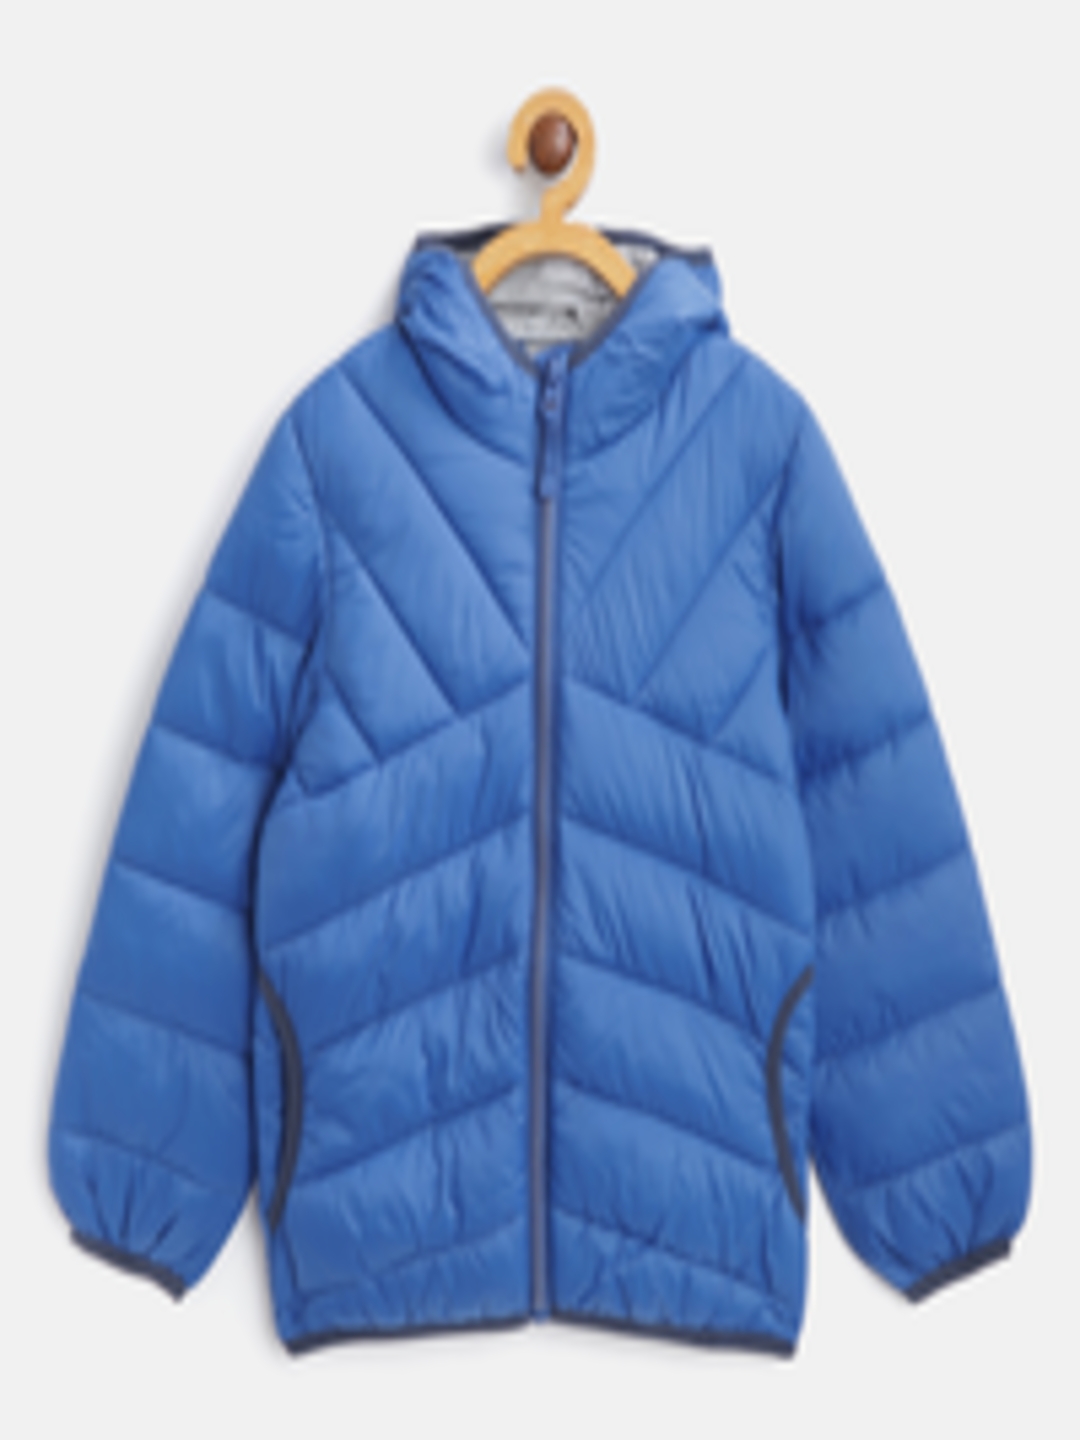 Buy Marks & Spencer Boys Blue Solid Water Resistant Hooded Puffer ...